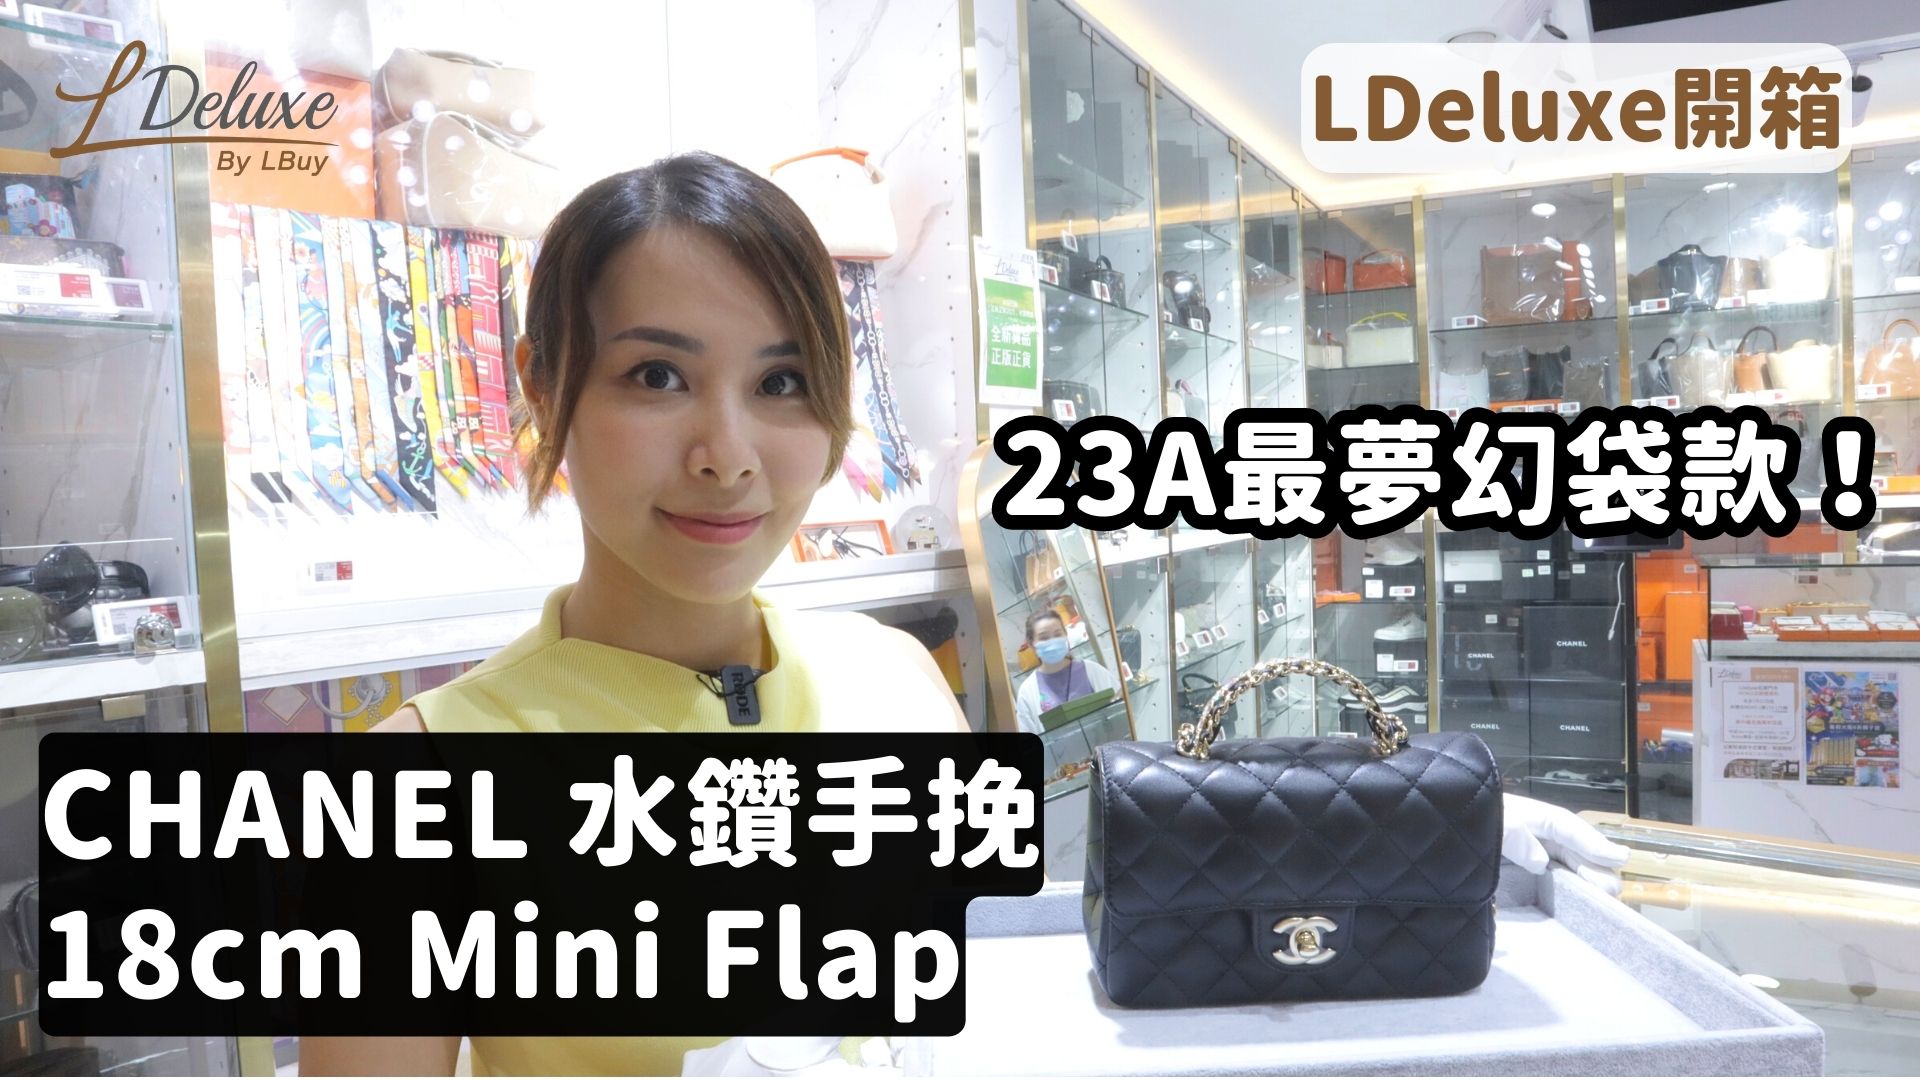 Mini canvas top handle bag Reference : ‎715771 FAARB 1044 | Gucci | Chanel  | LV | DIOR | HERMES', available at 4340